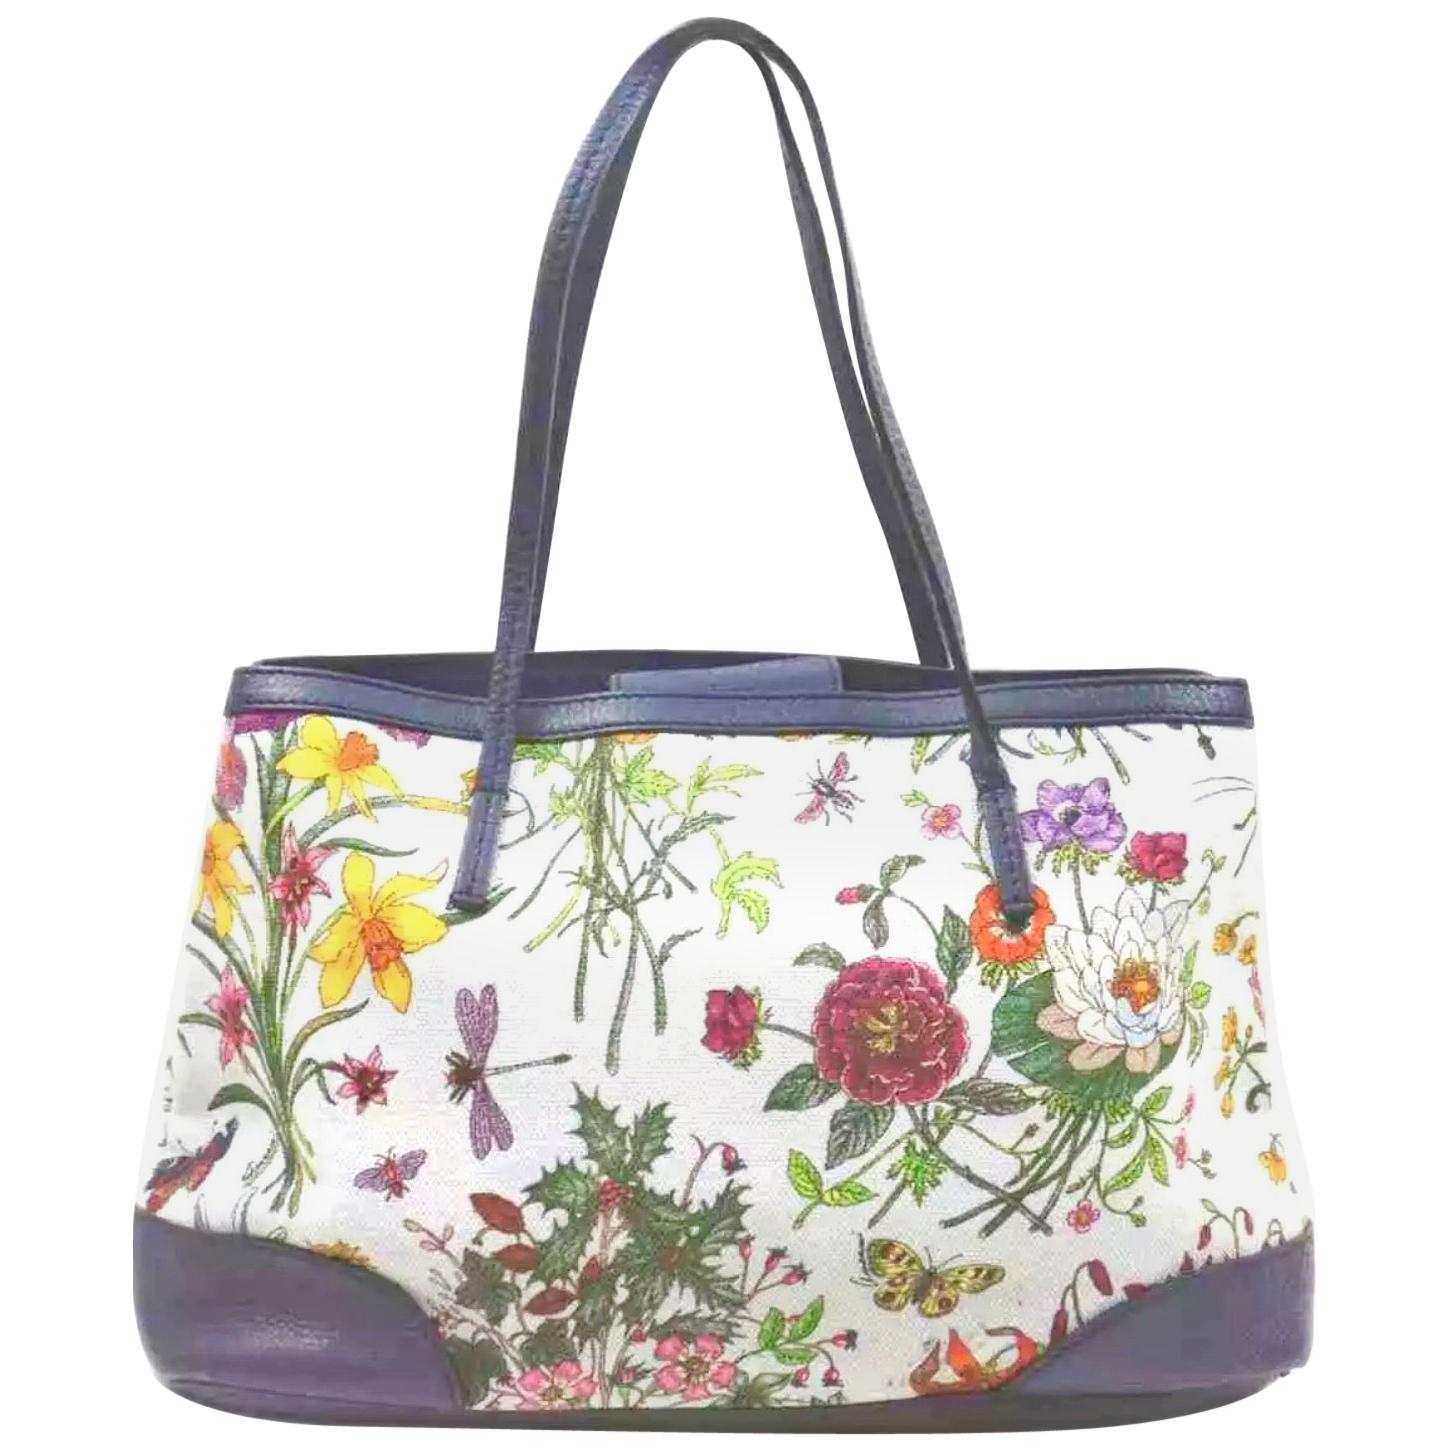  Gucci Flora Canvas Leather Trim Navy Blue With Flowers  Tote Handbag 1705189